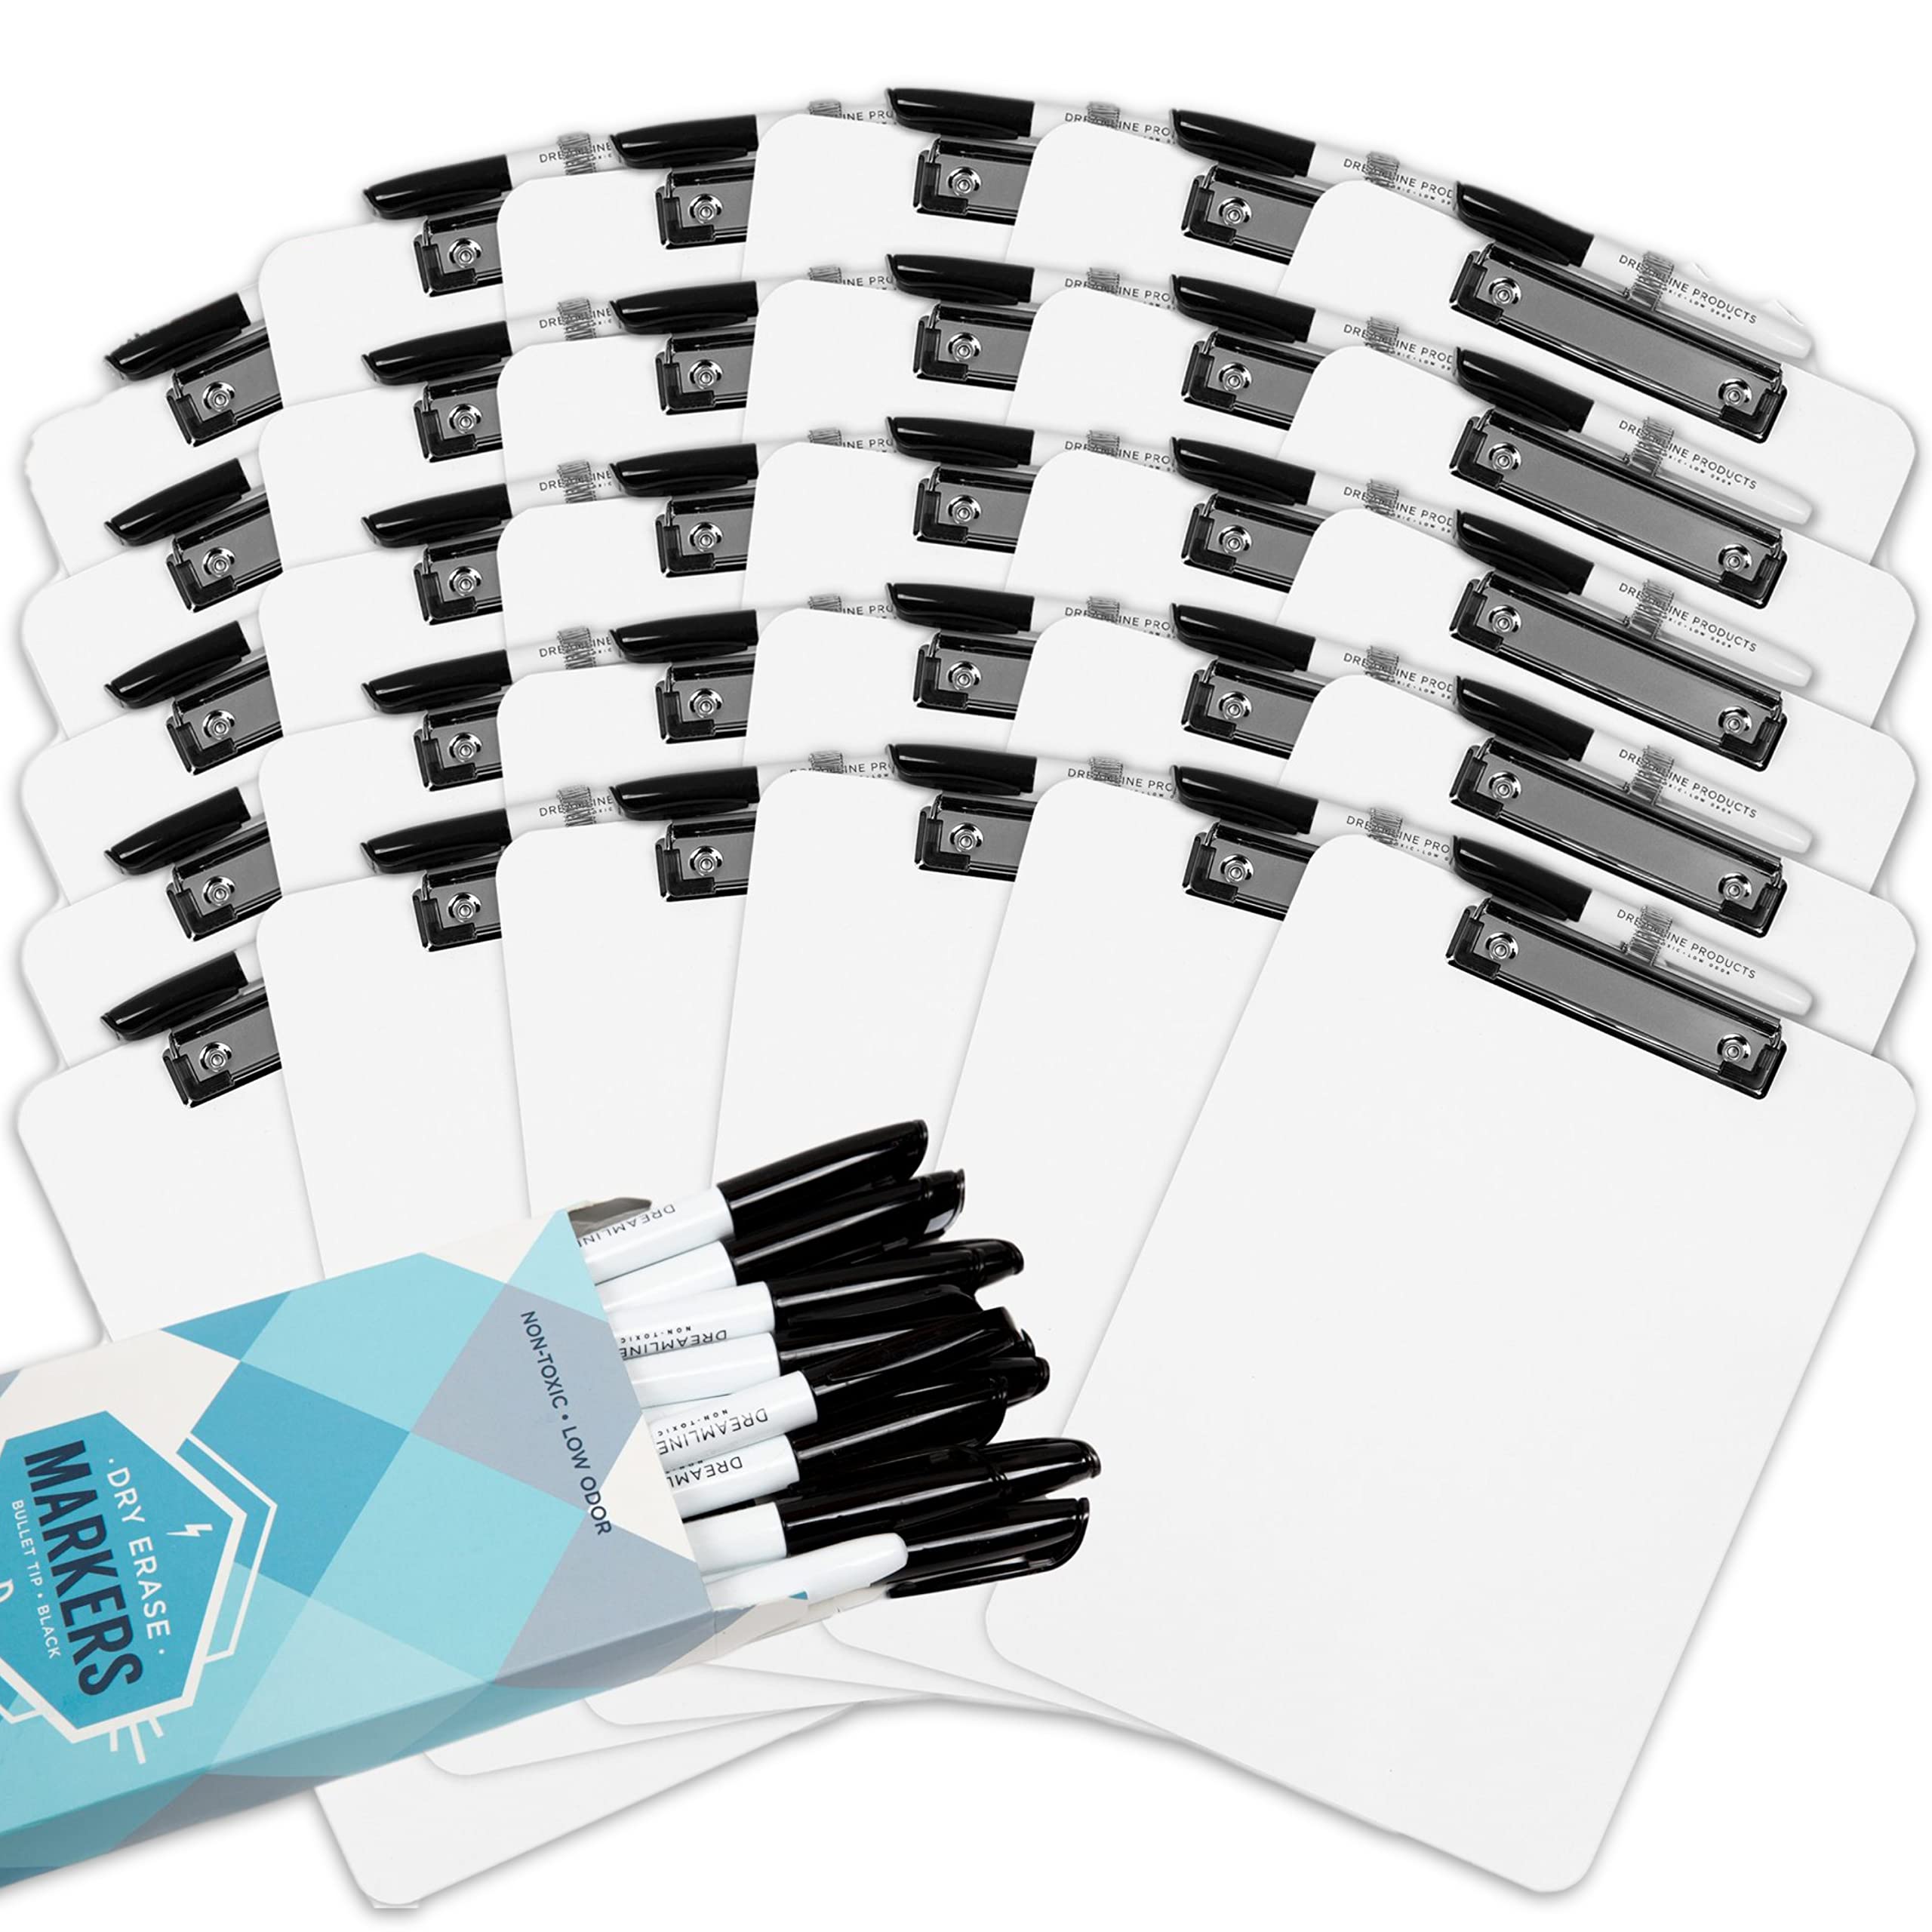 Book Cover Dry Erase Clipboard + Pen Holder + Markers (30pc) Set of 30 Clip Boards Multi Pack with Whiteboard Pens! 12.5 x 9 Inch, Holds 100 Sheets! Clipboards with Low Profile Clip Board Clips